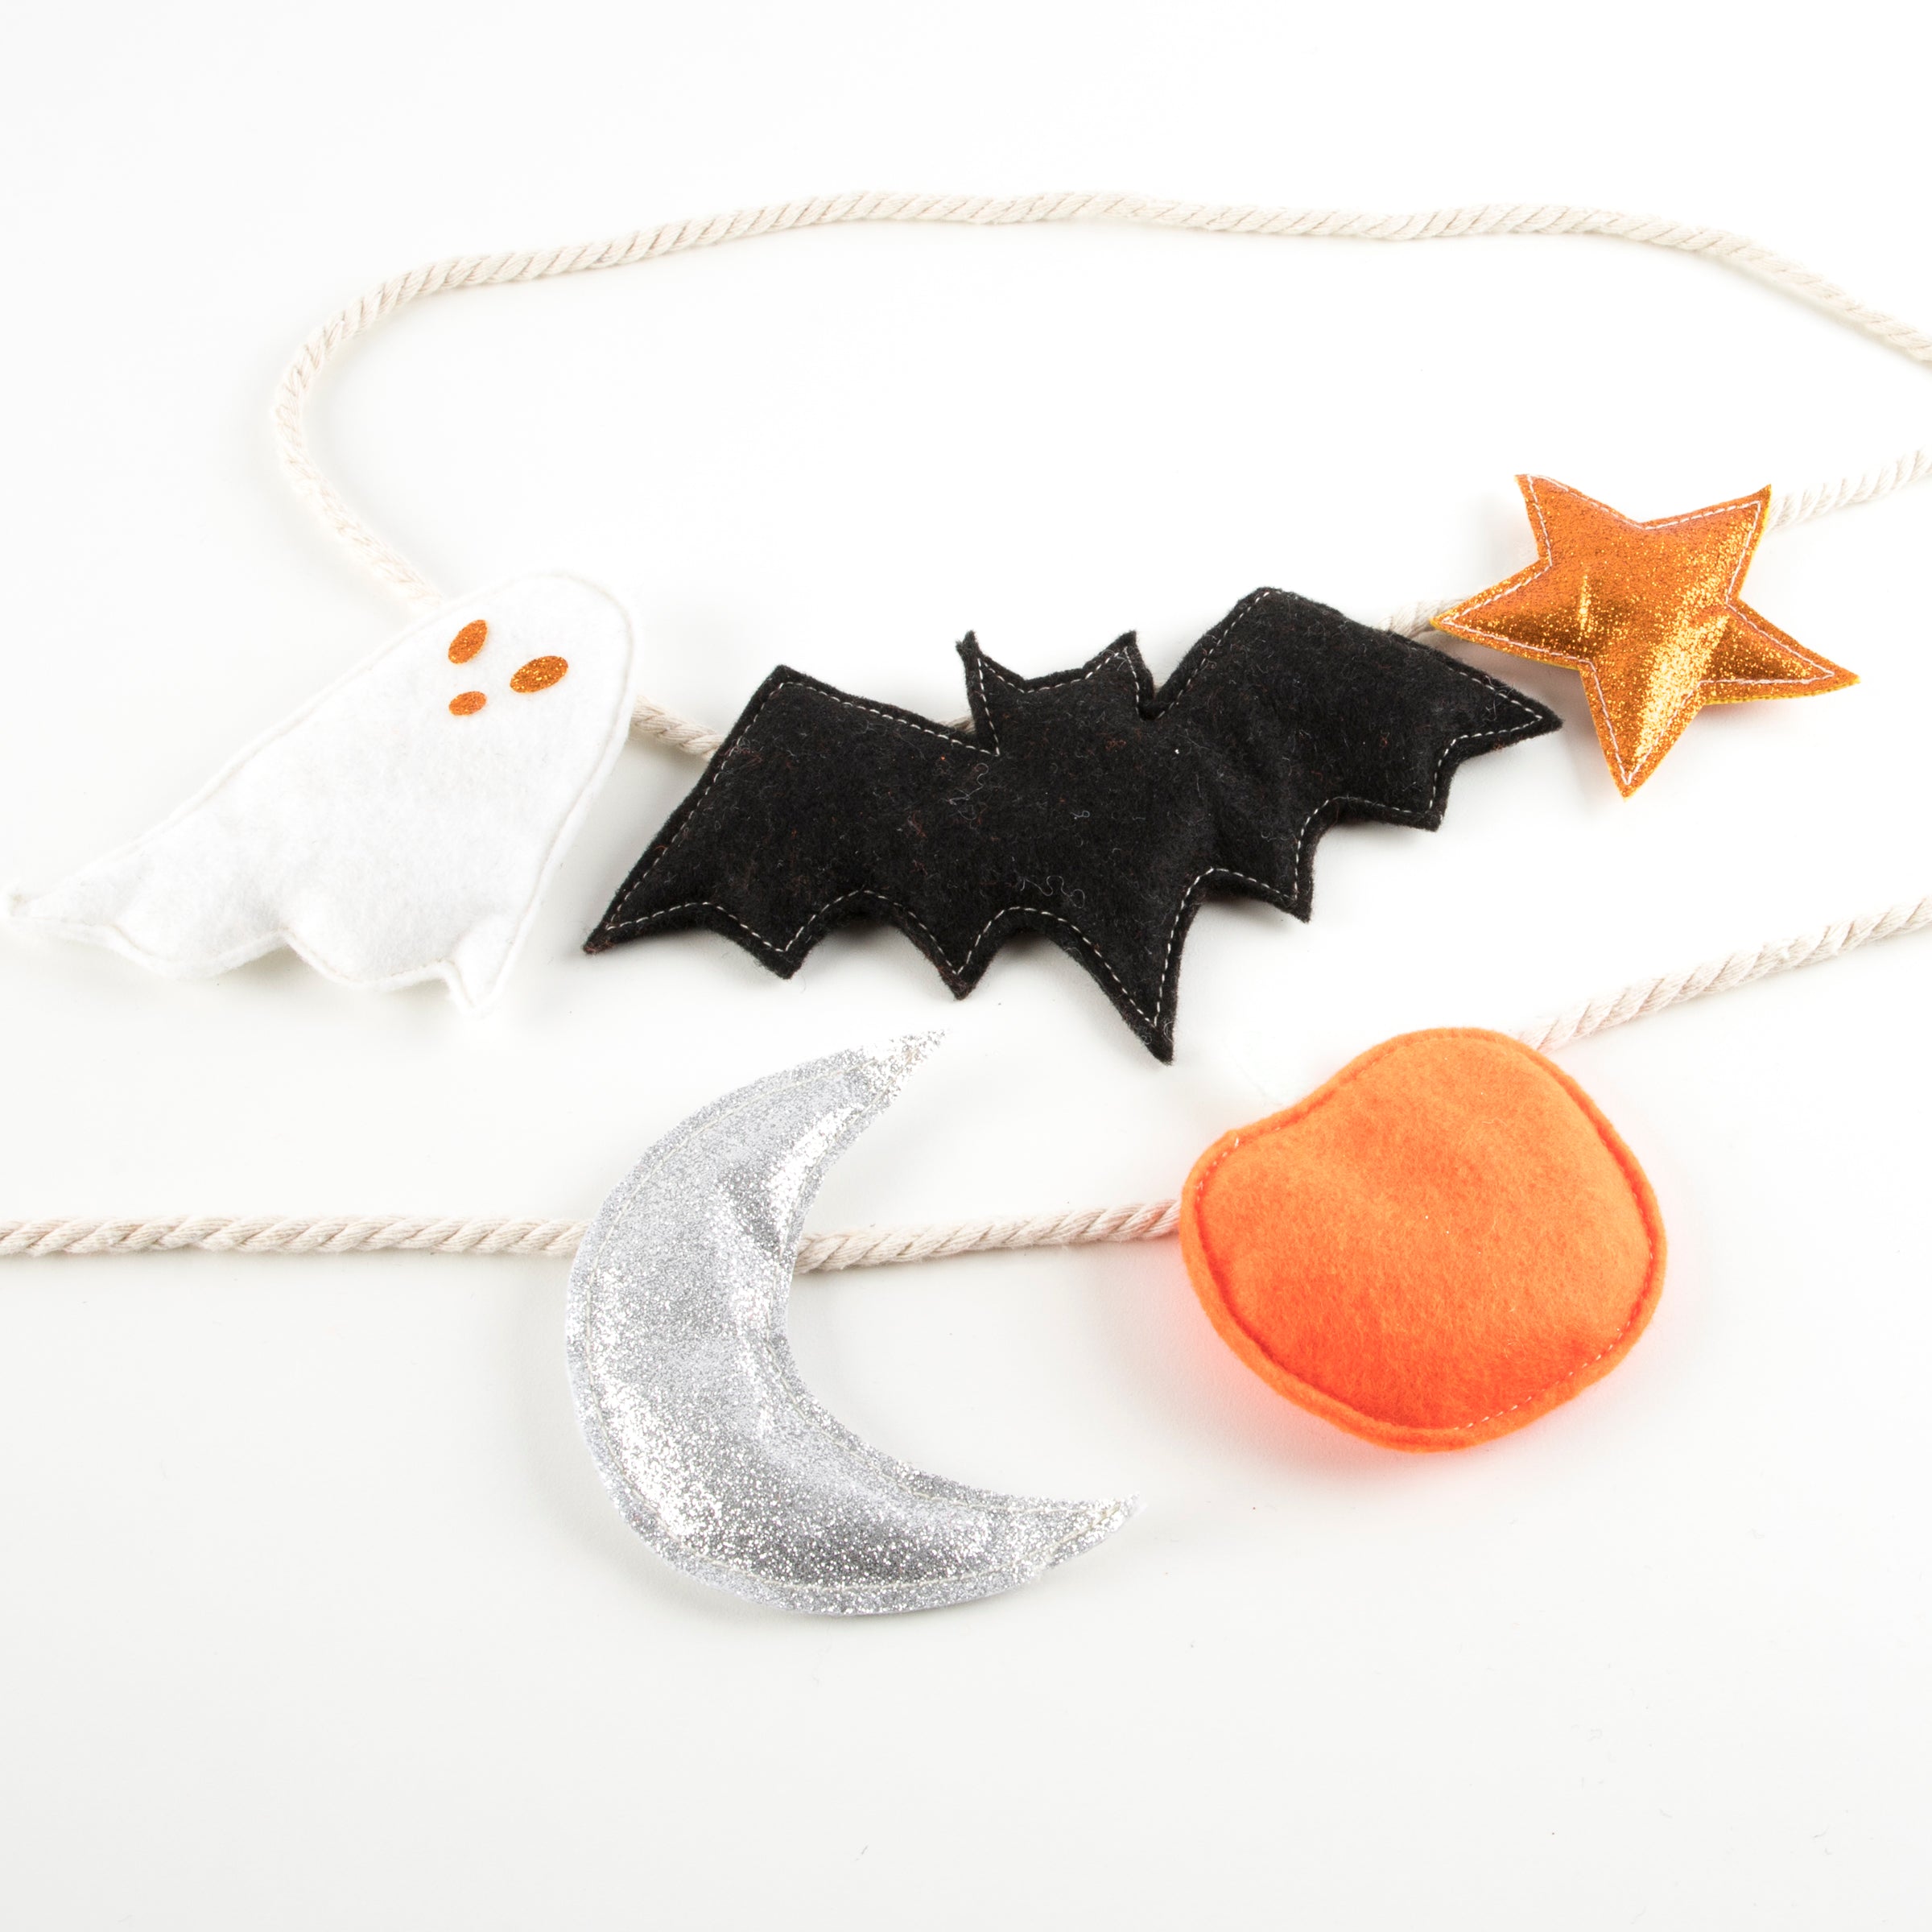 This indoor Halloween decoration is a garland crafted from felt and glittery fabric.